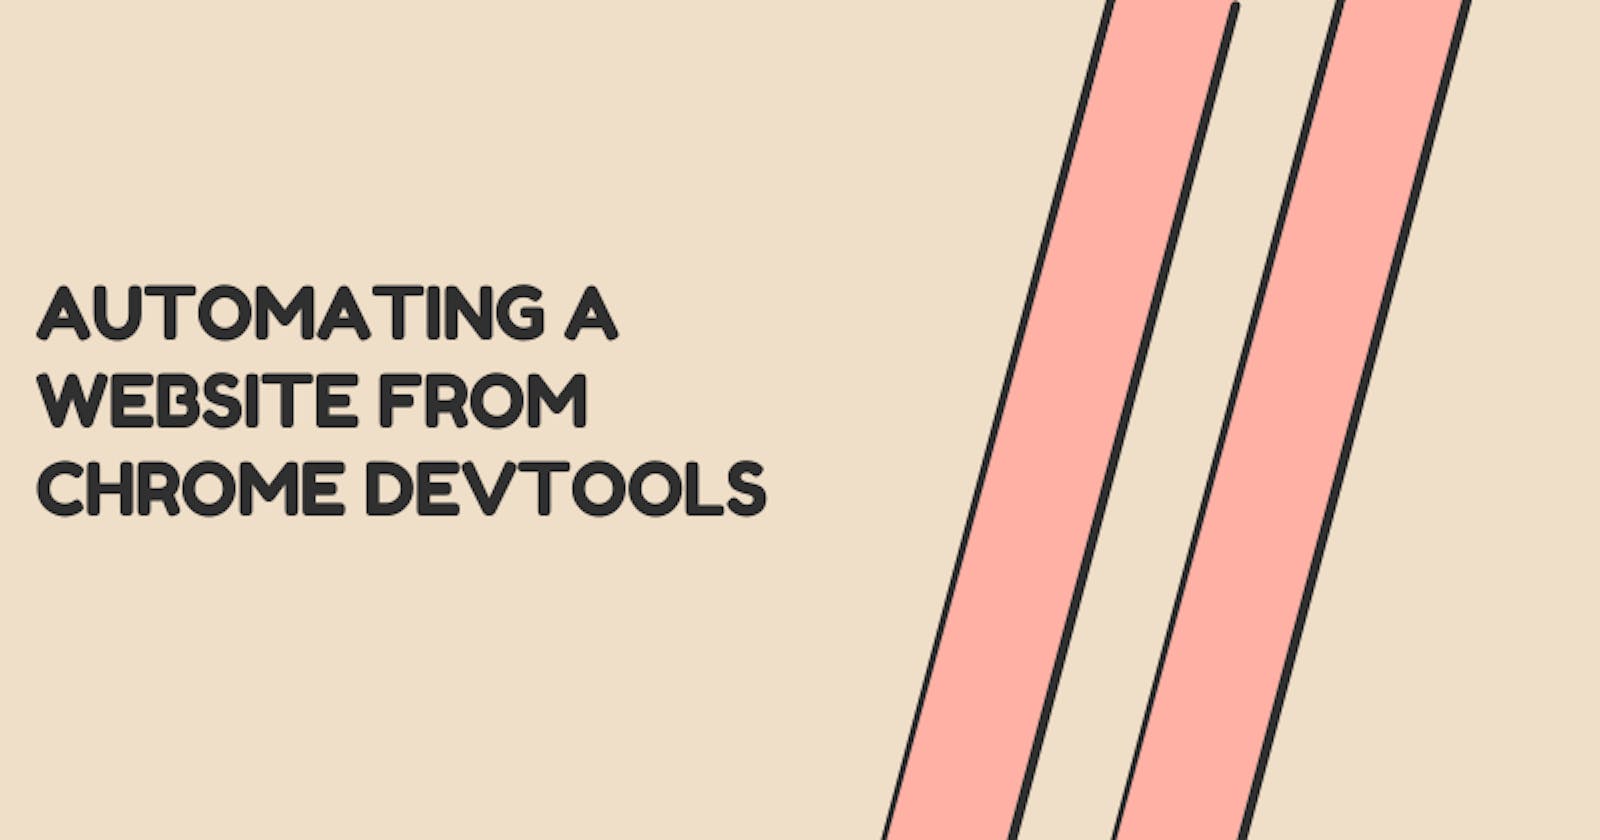 Automating a website from Chrome DevTools